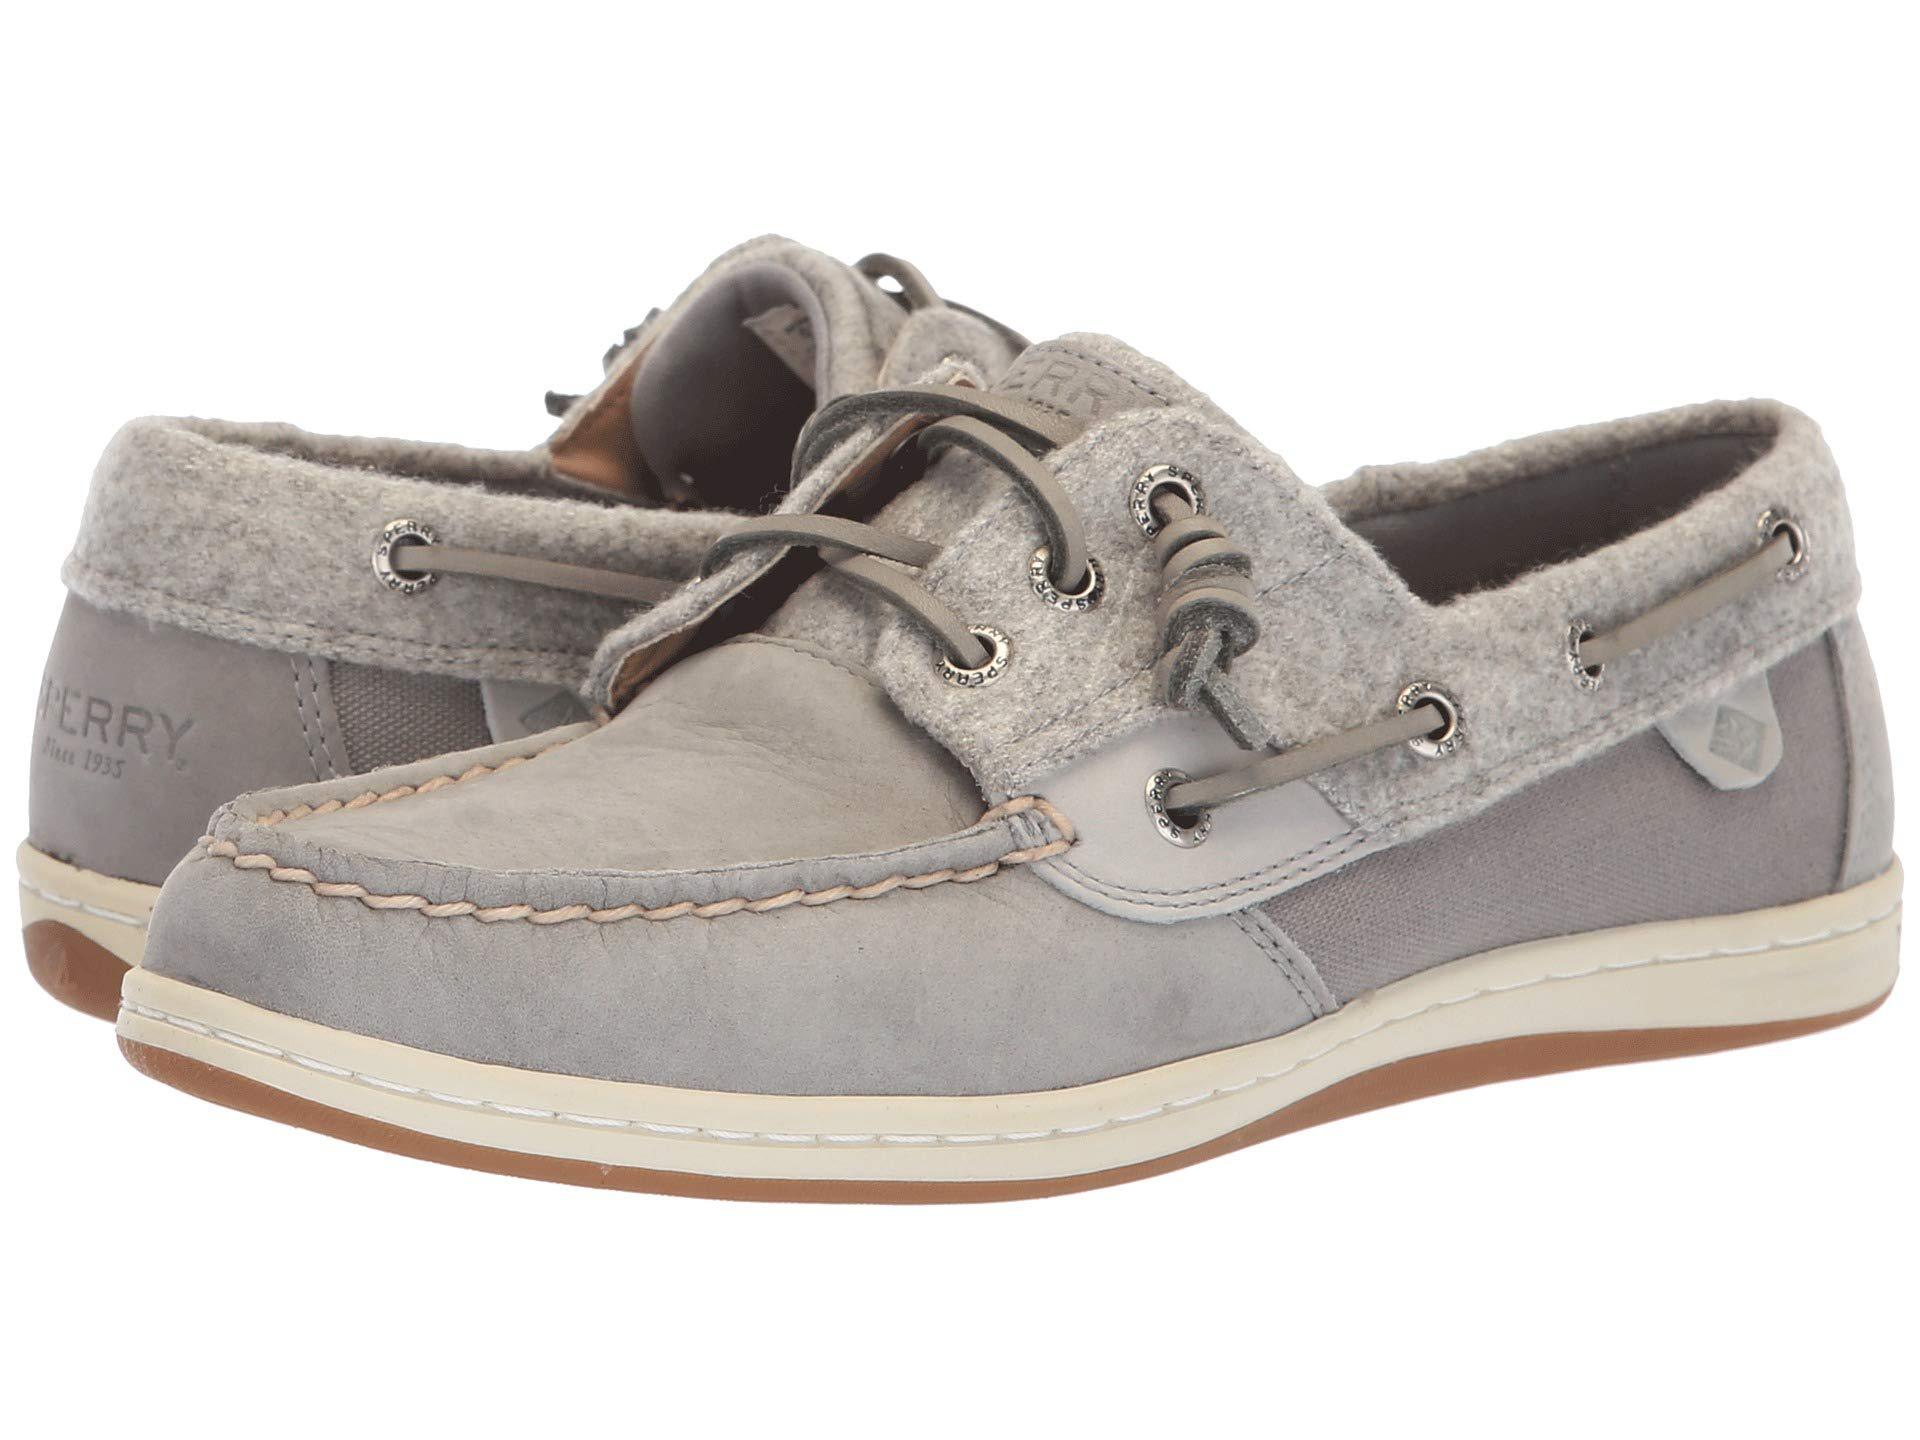 Lyst - Sperry Top-Sider Songfish Wool (linen) Women's Lace Up Casual ...